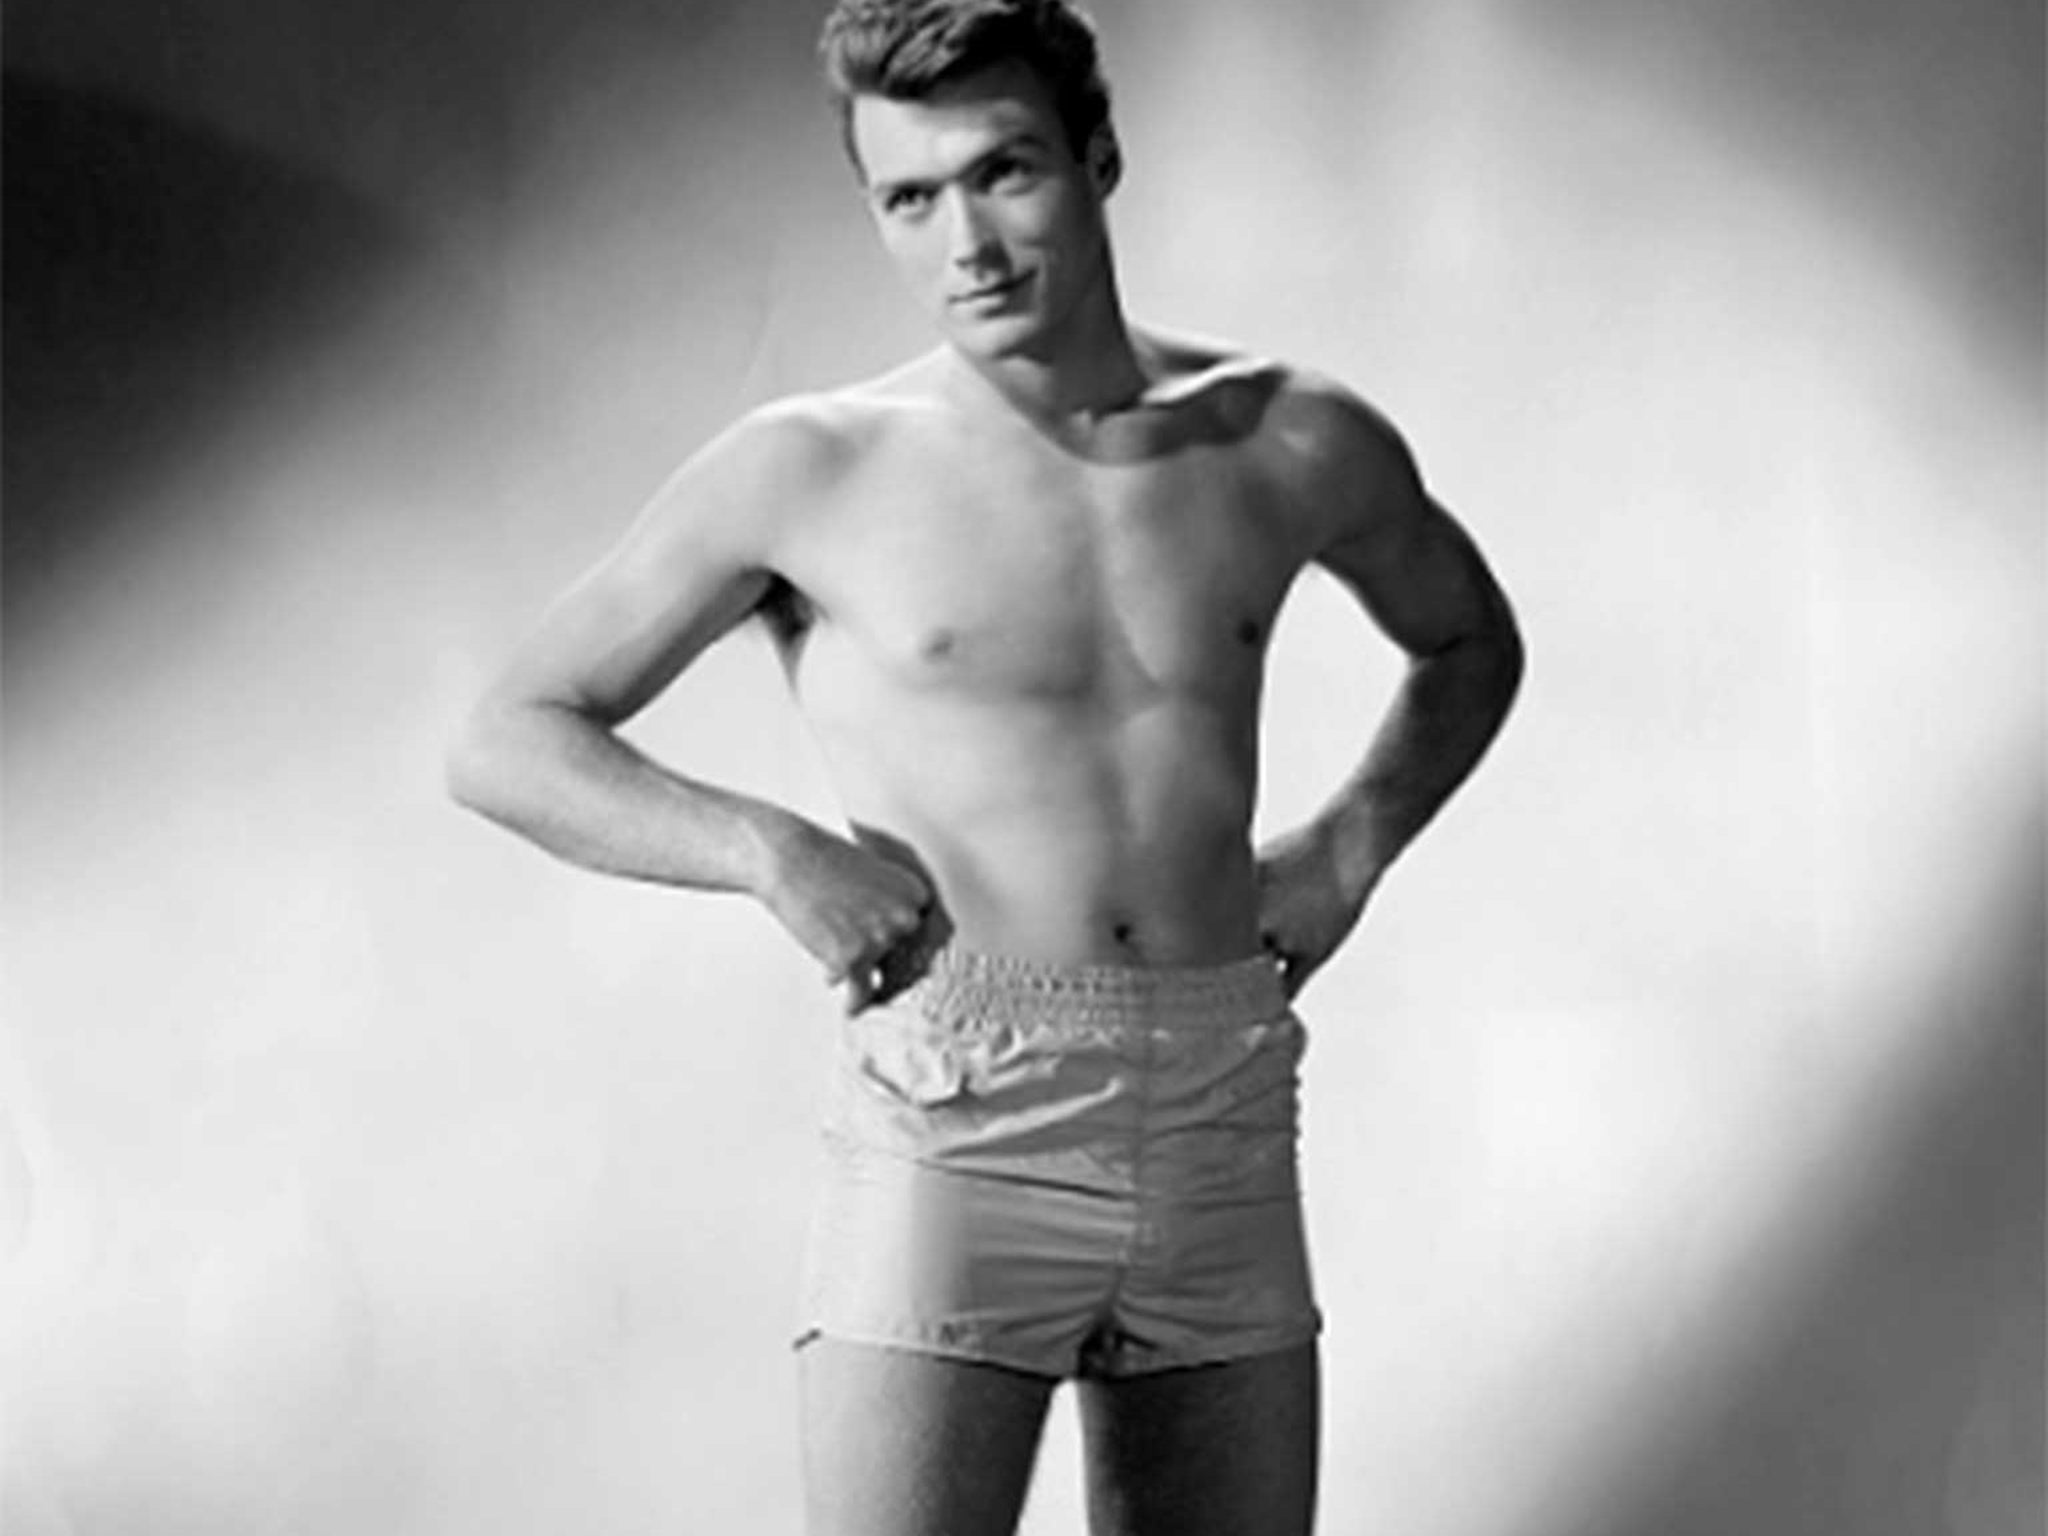 Clint Eastwood in 1955